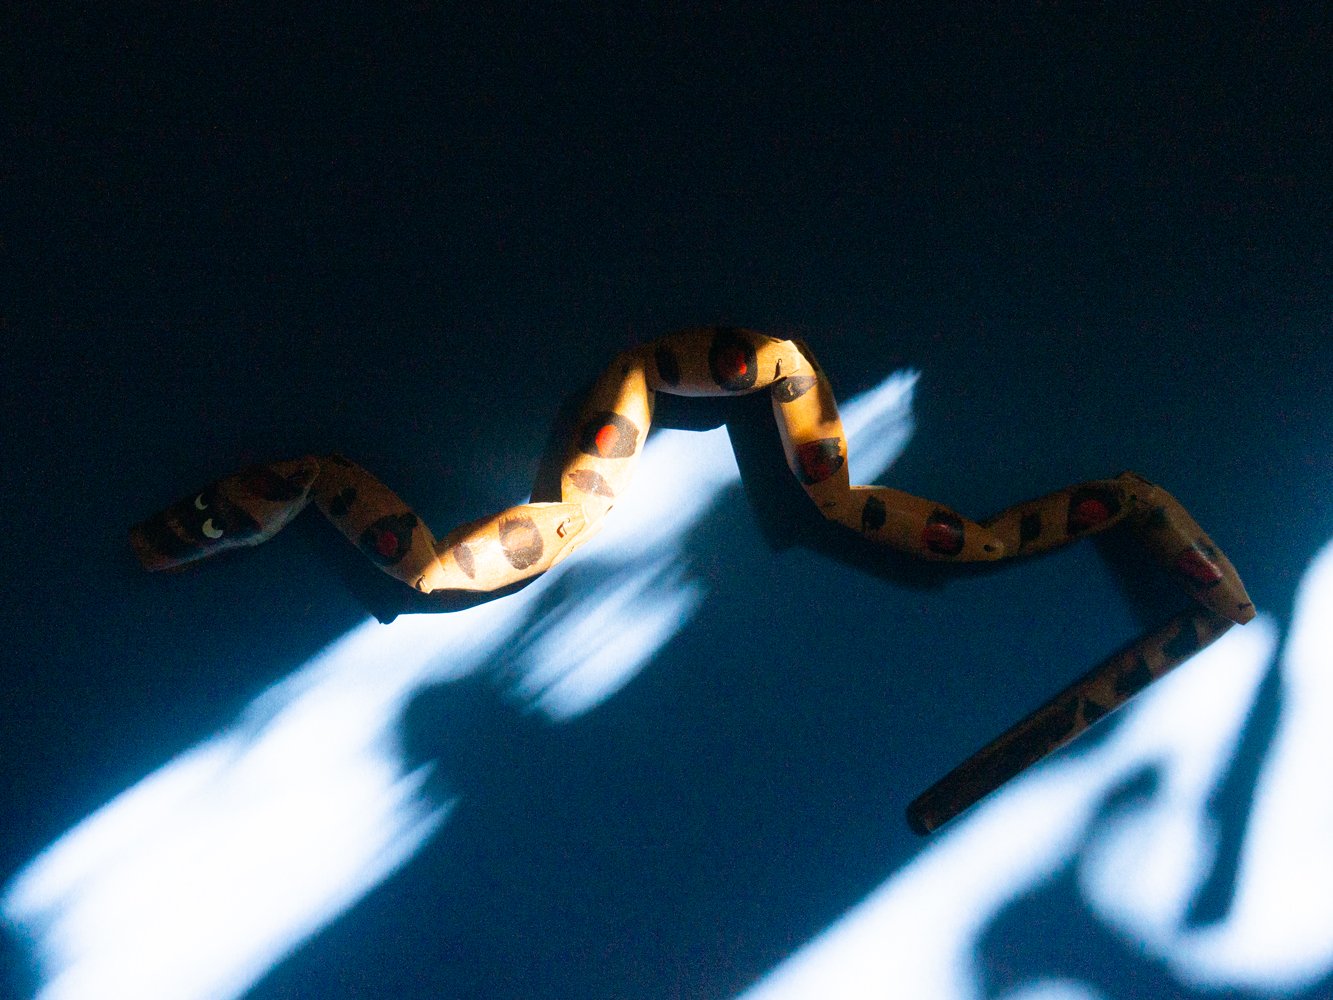 Image of wiggly snake